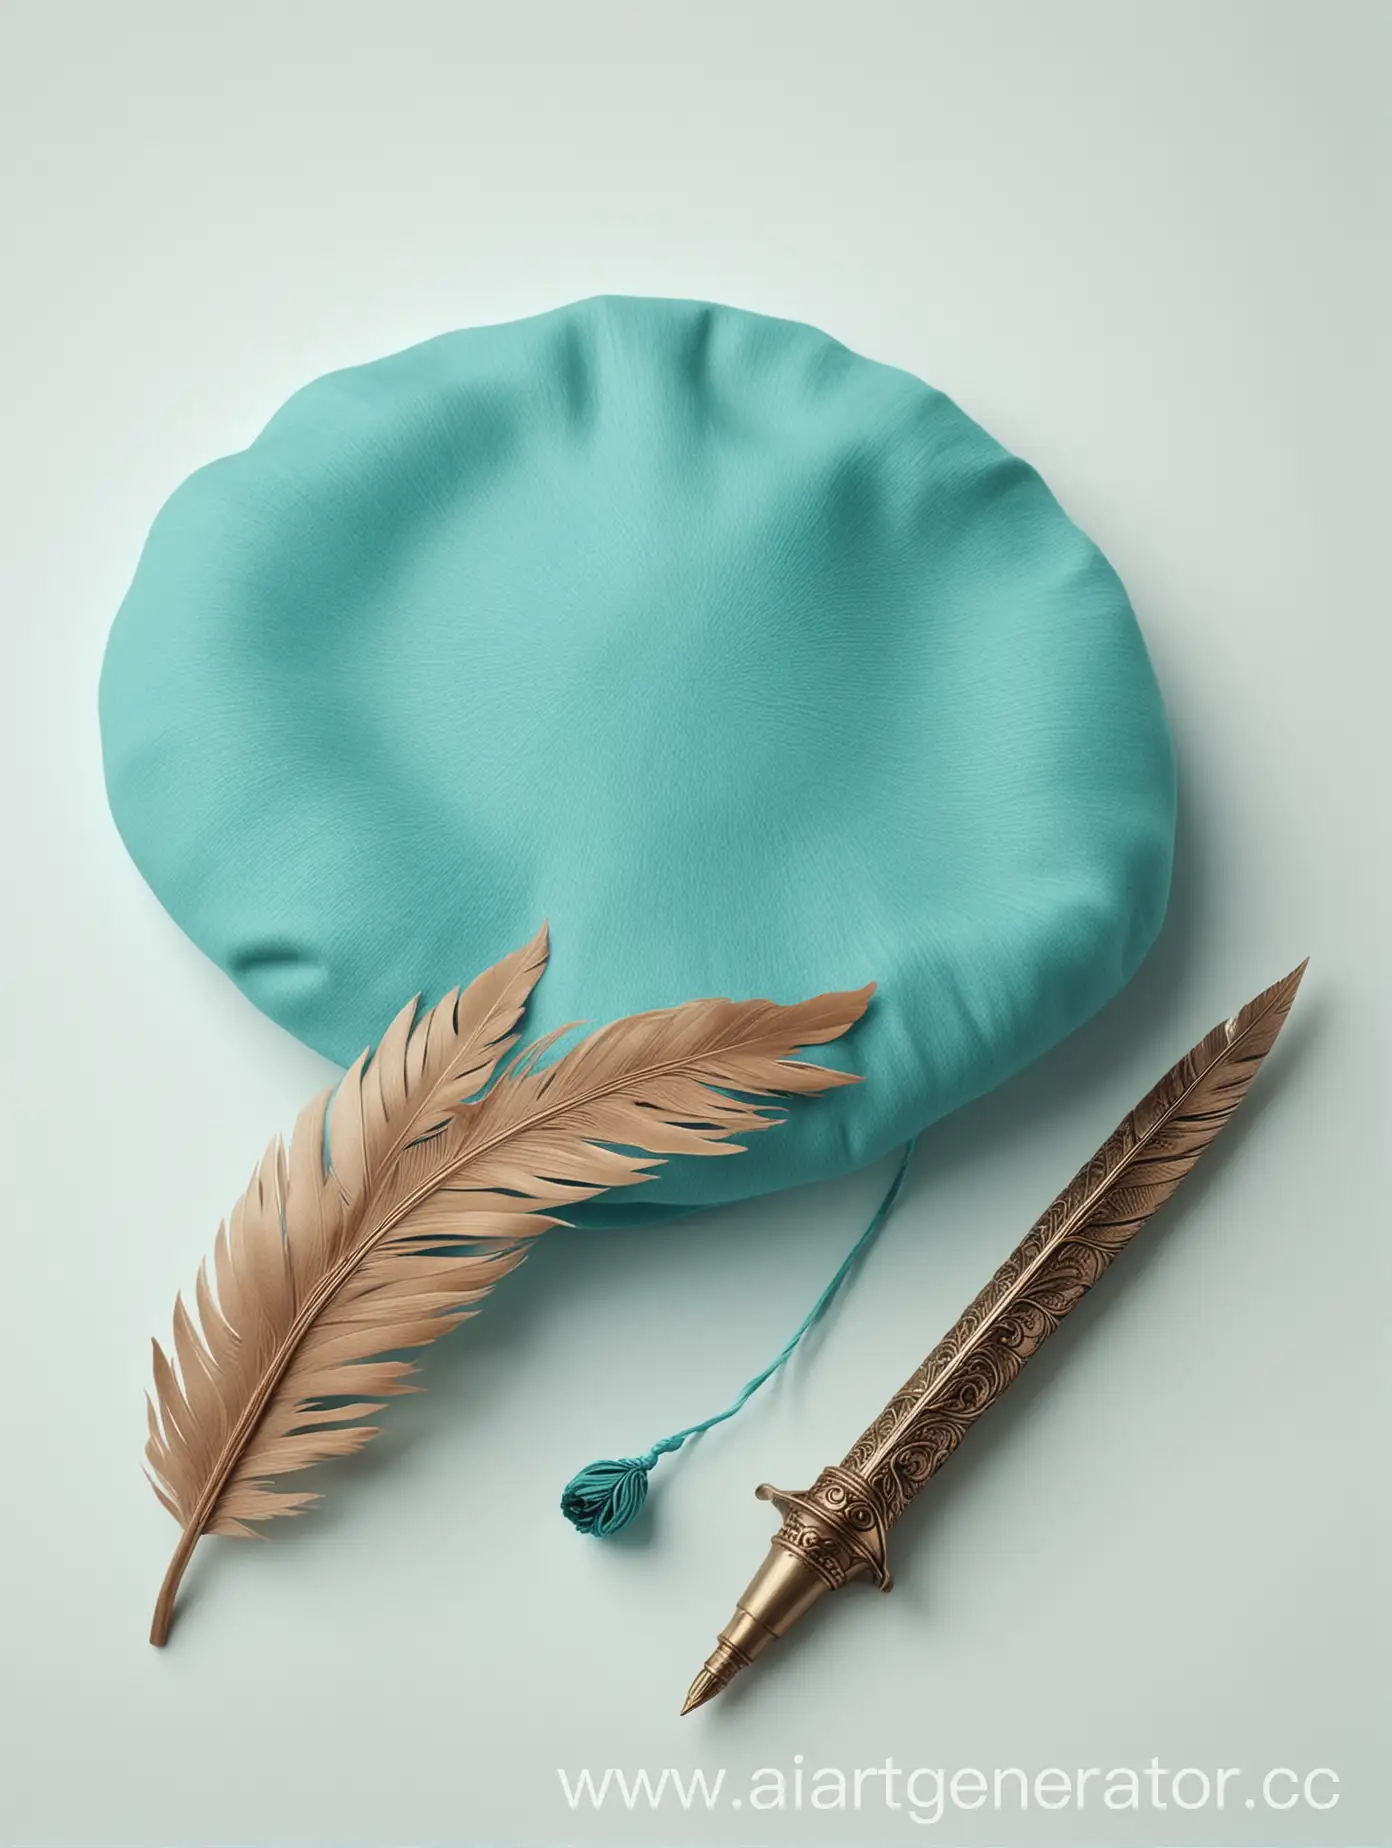 Shakespearean beret and quill for writing in turquoise tones, on a white background, in the style of animation